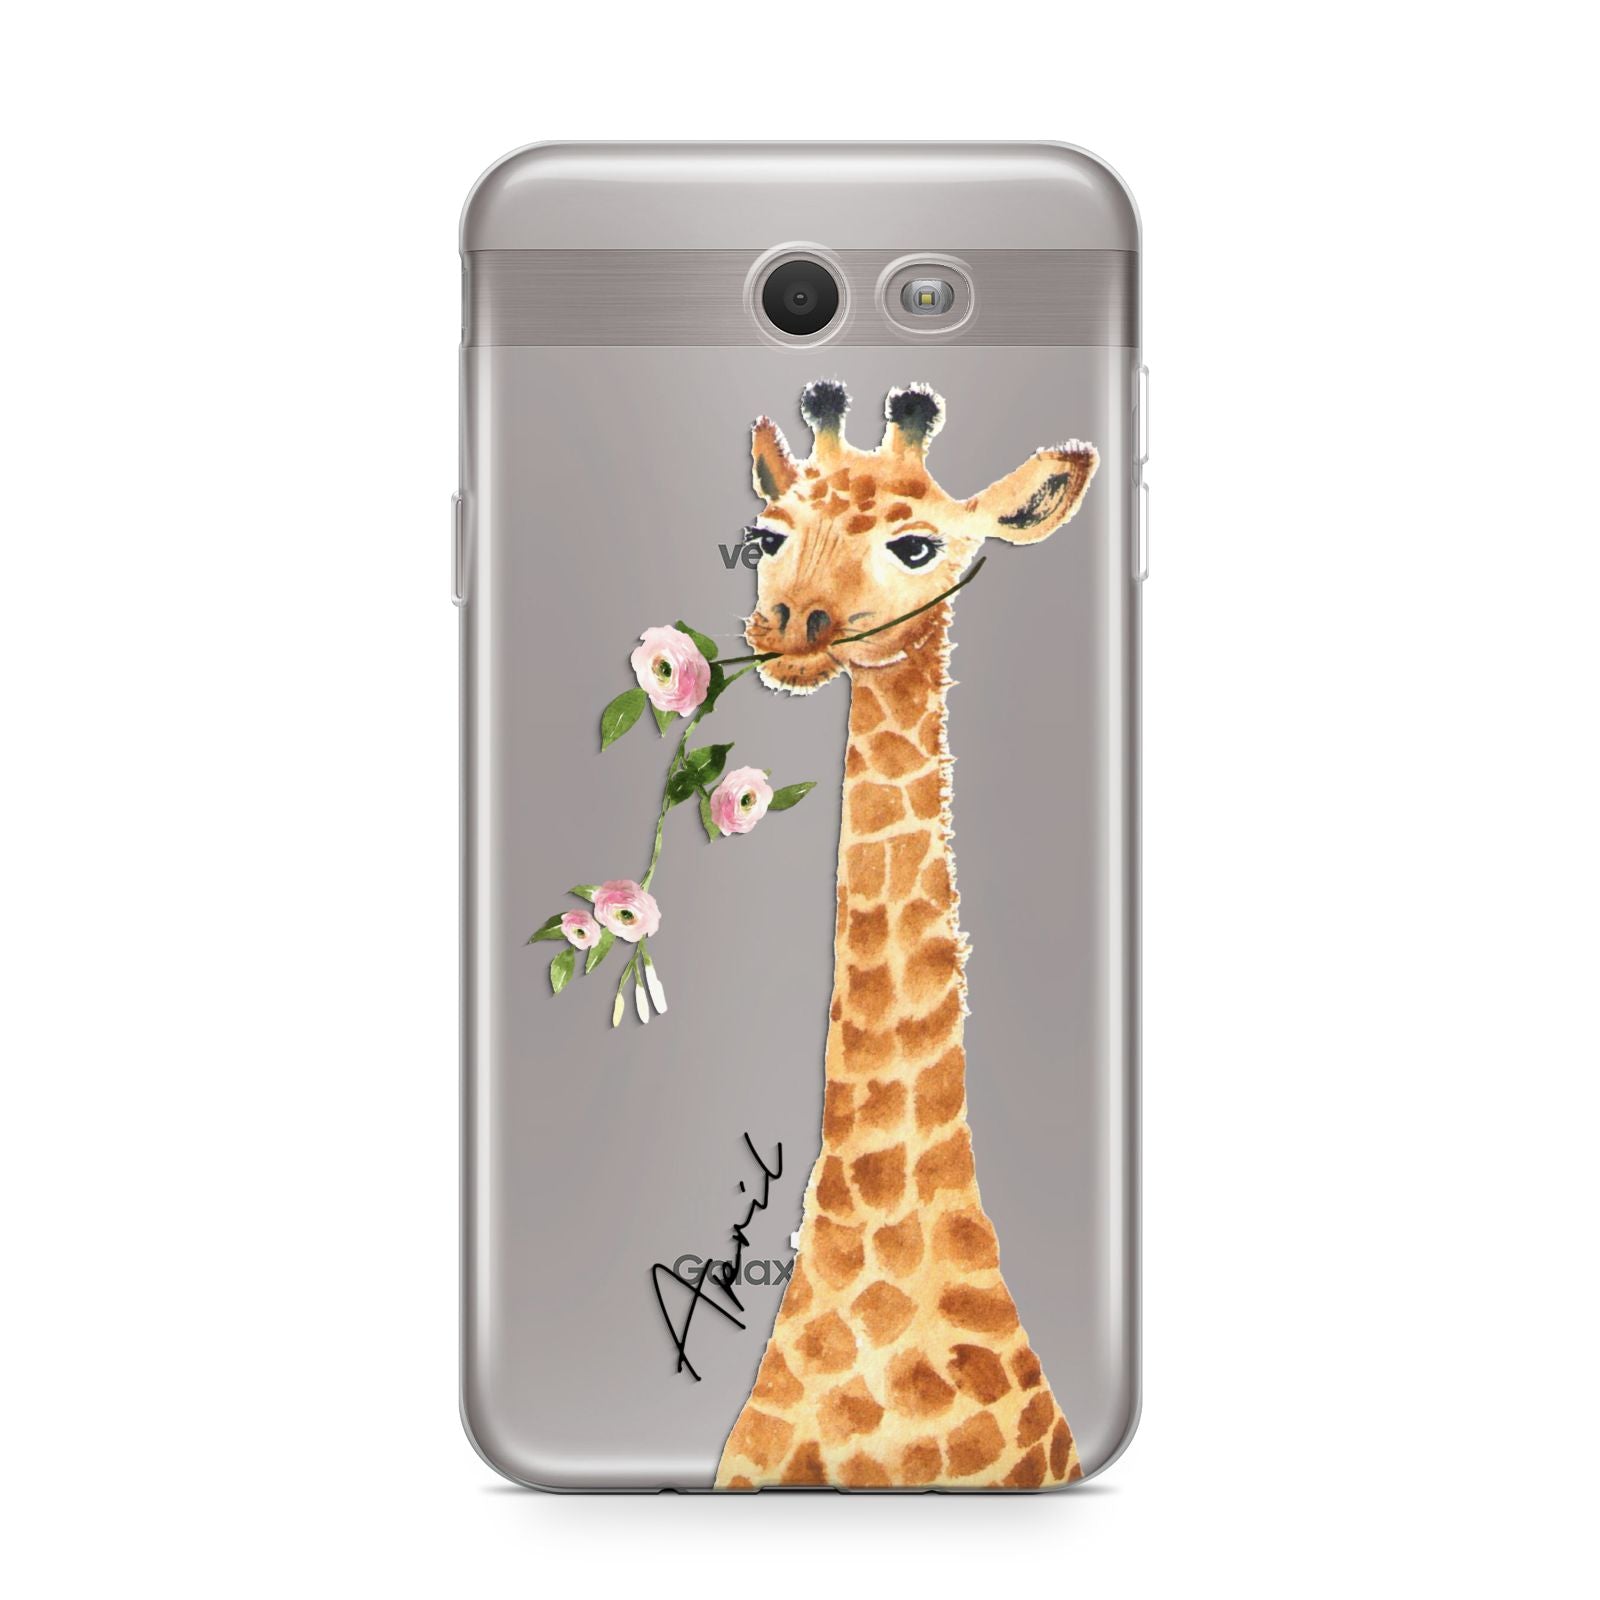 Personalised Giraffe with Name Samsung Galaxy J7 2017 Case